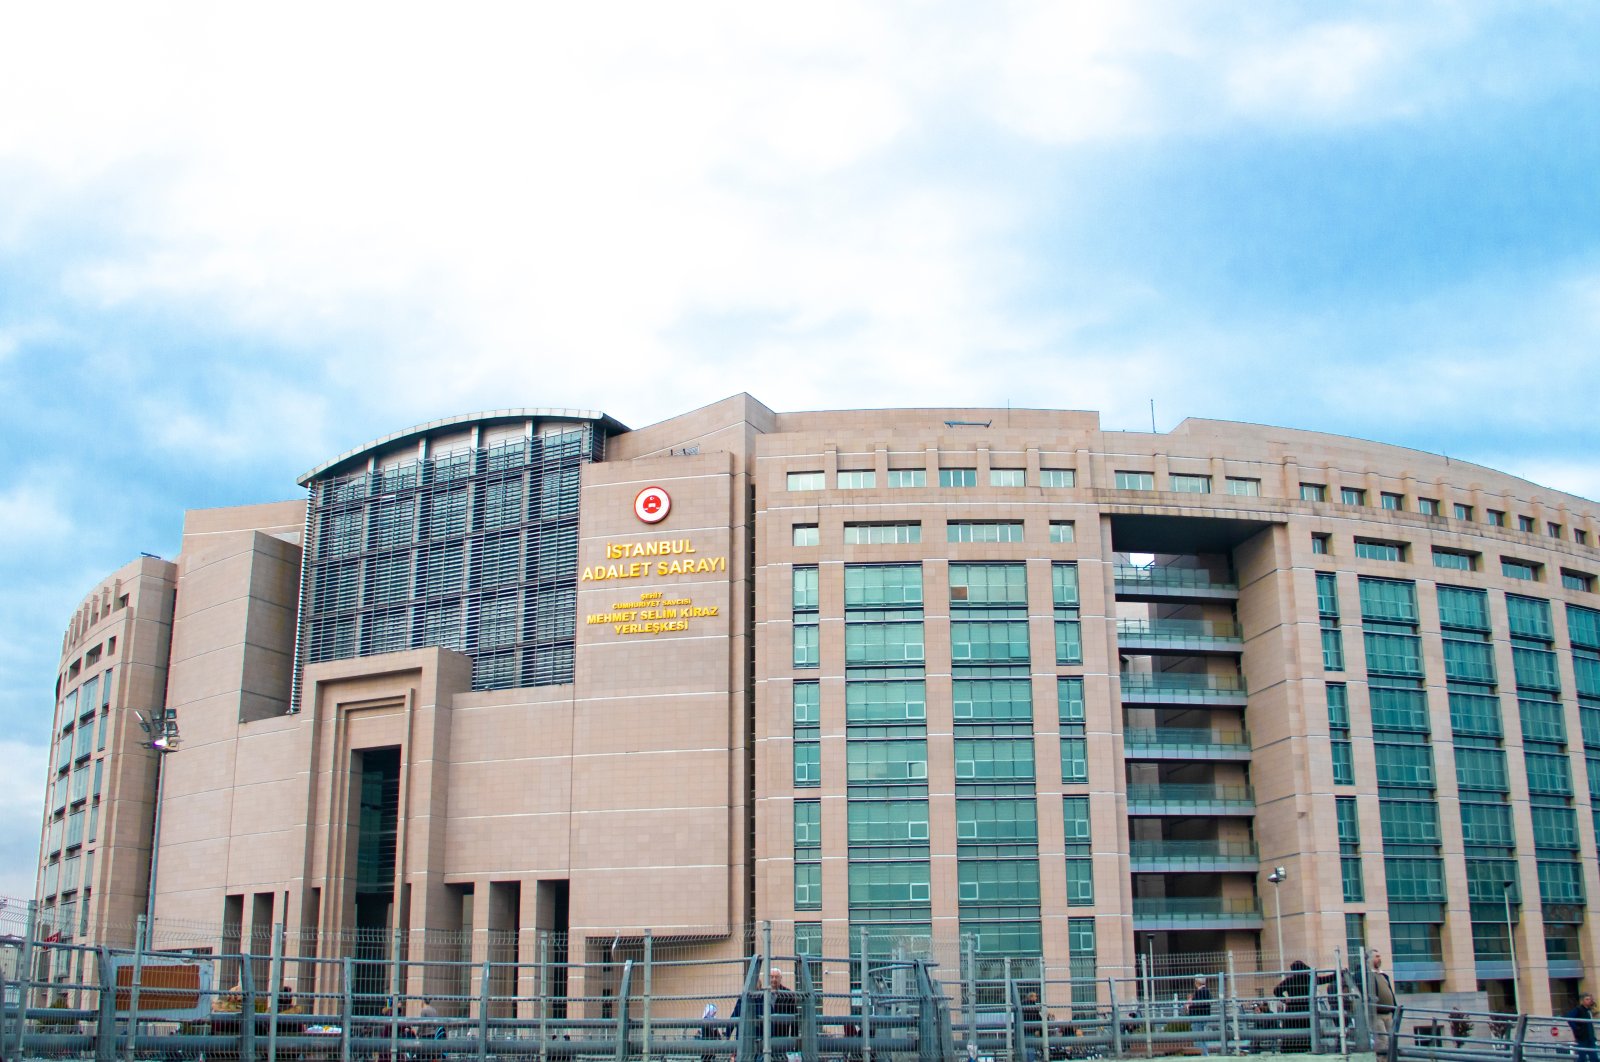 The exterior view of Istanbul Çağlayan Justice Palace, the biggest courthouse in the city, Istanbul, Türkiye. April 7, 2019. (Shutterstock Photo)